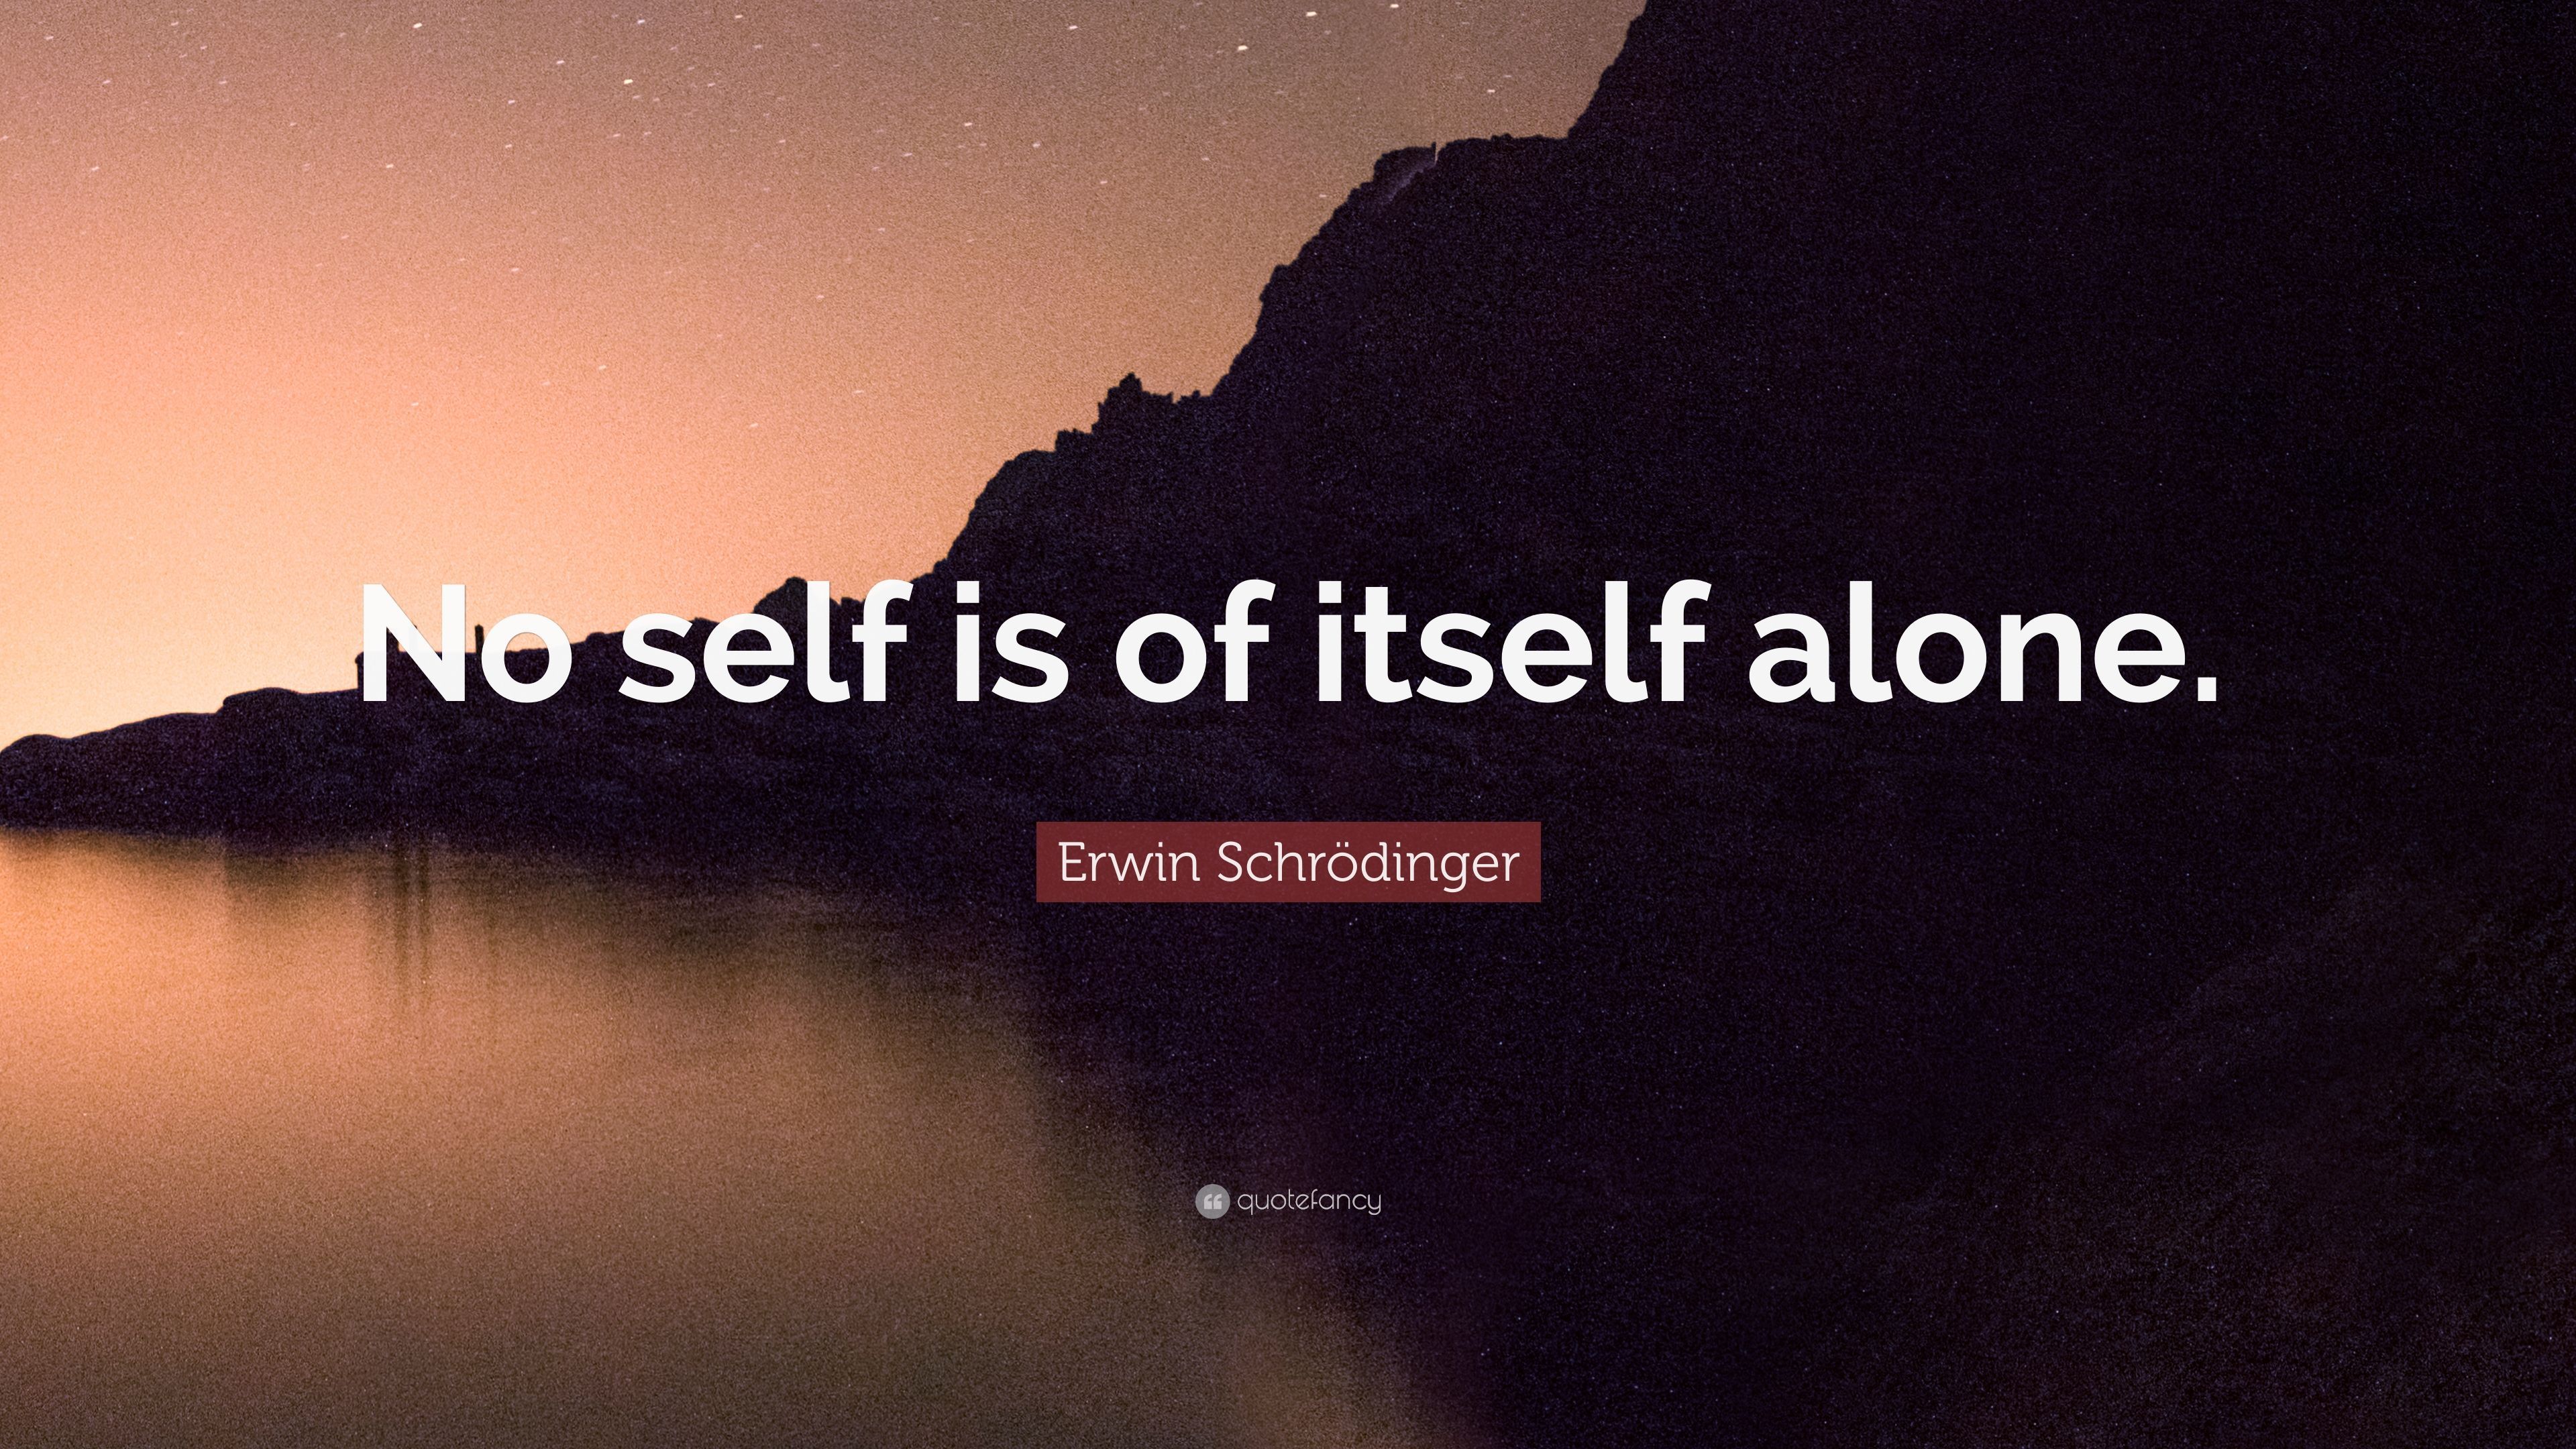 Quote: “No self is of itself alone .quotefancy.com